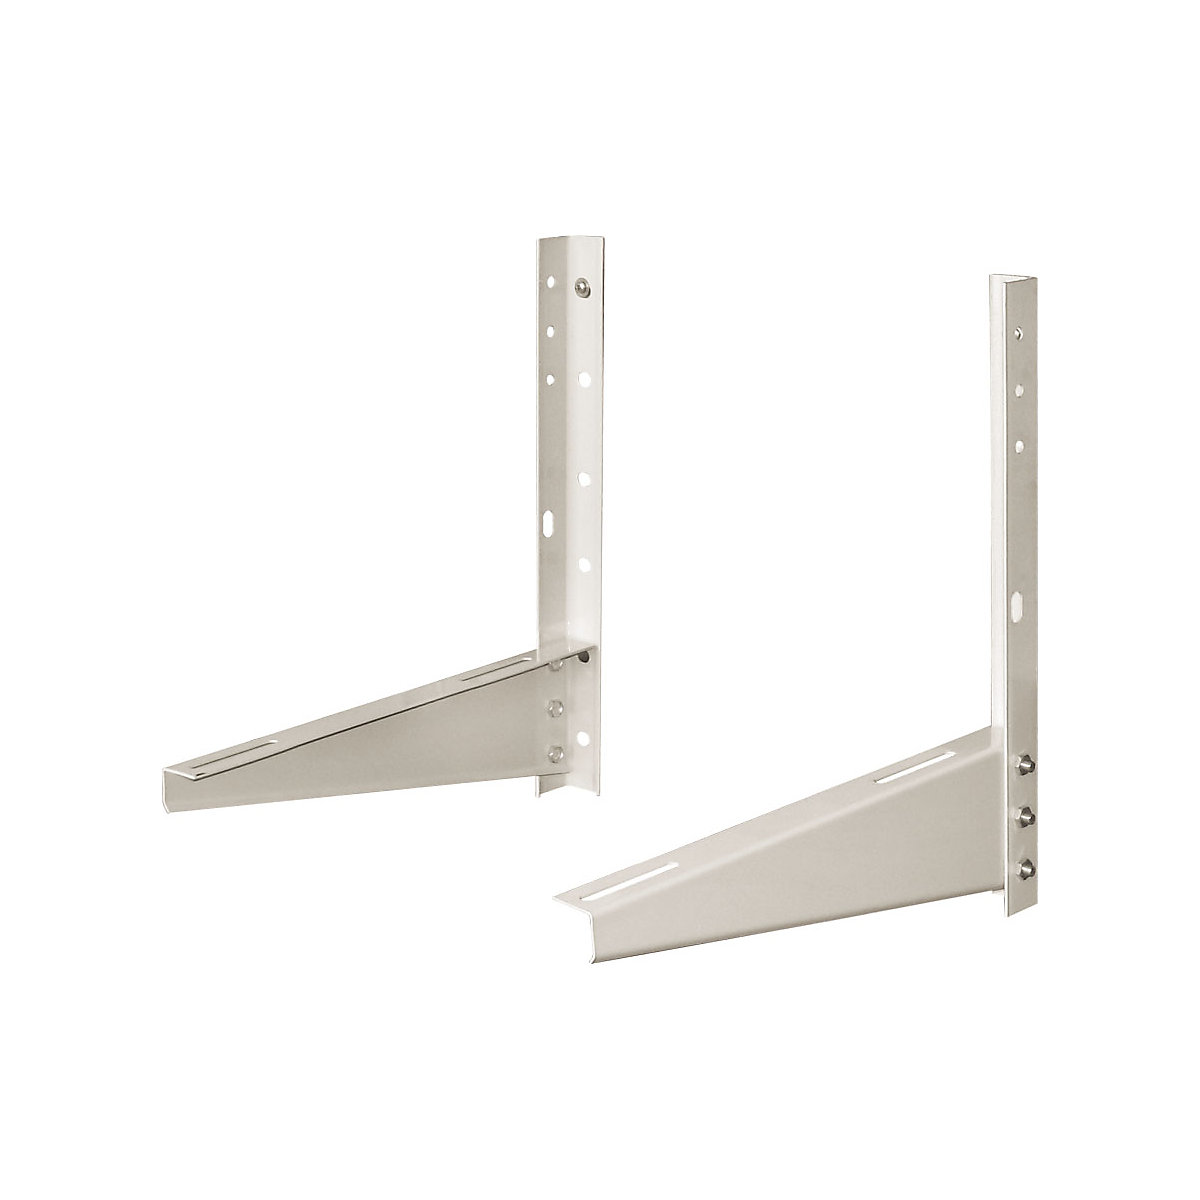 Wall bracket for split air conditioners